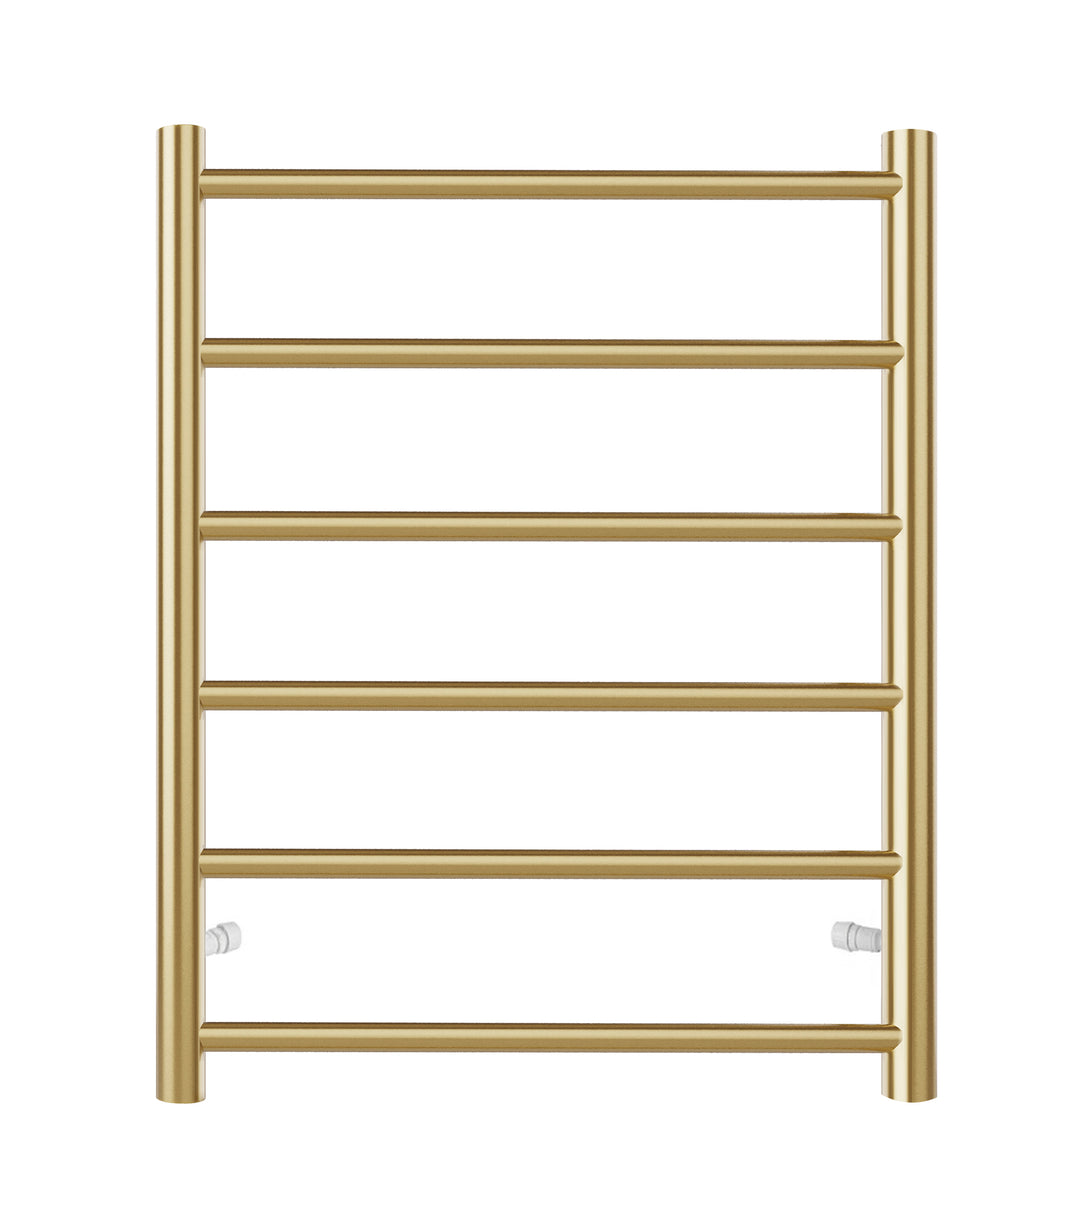 Round Electric Heated Towel Rack 6 Bars Universal Inlet Brushed Gold IS-R06-2BG